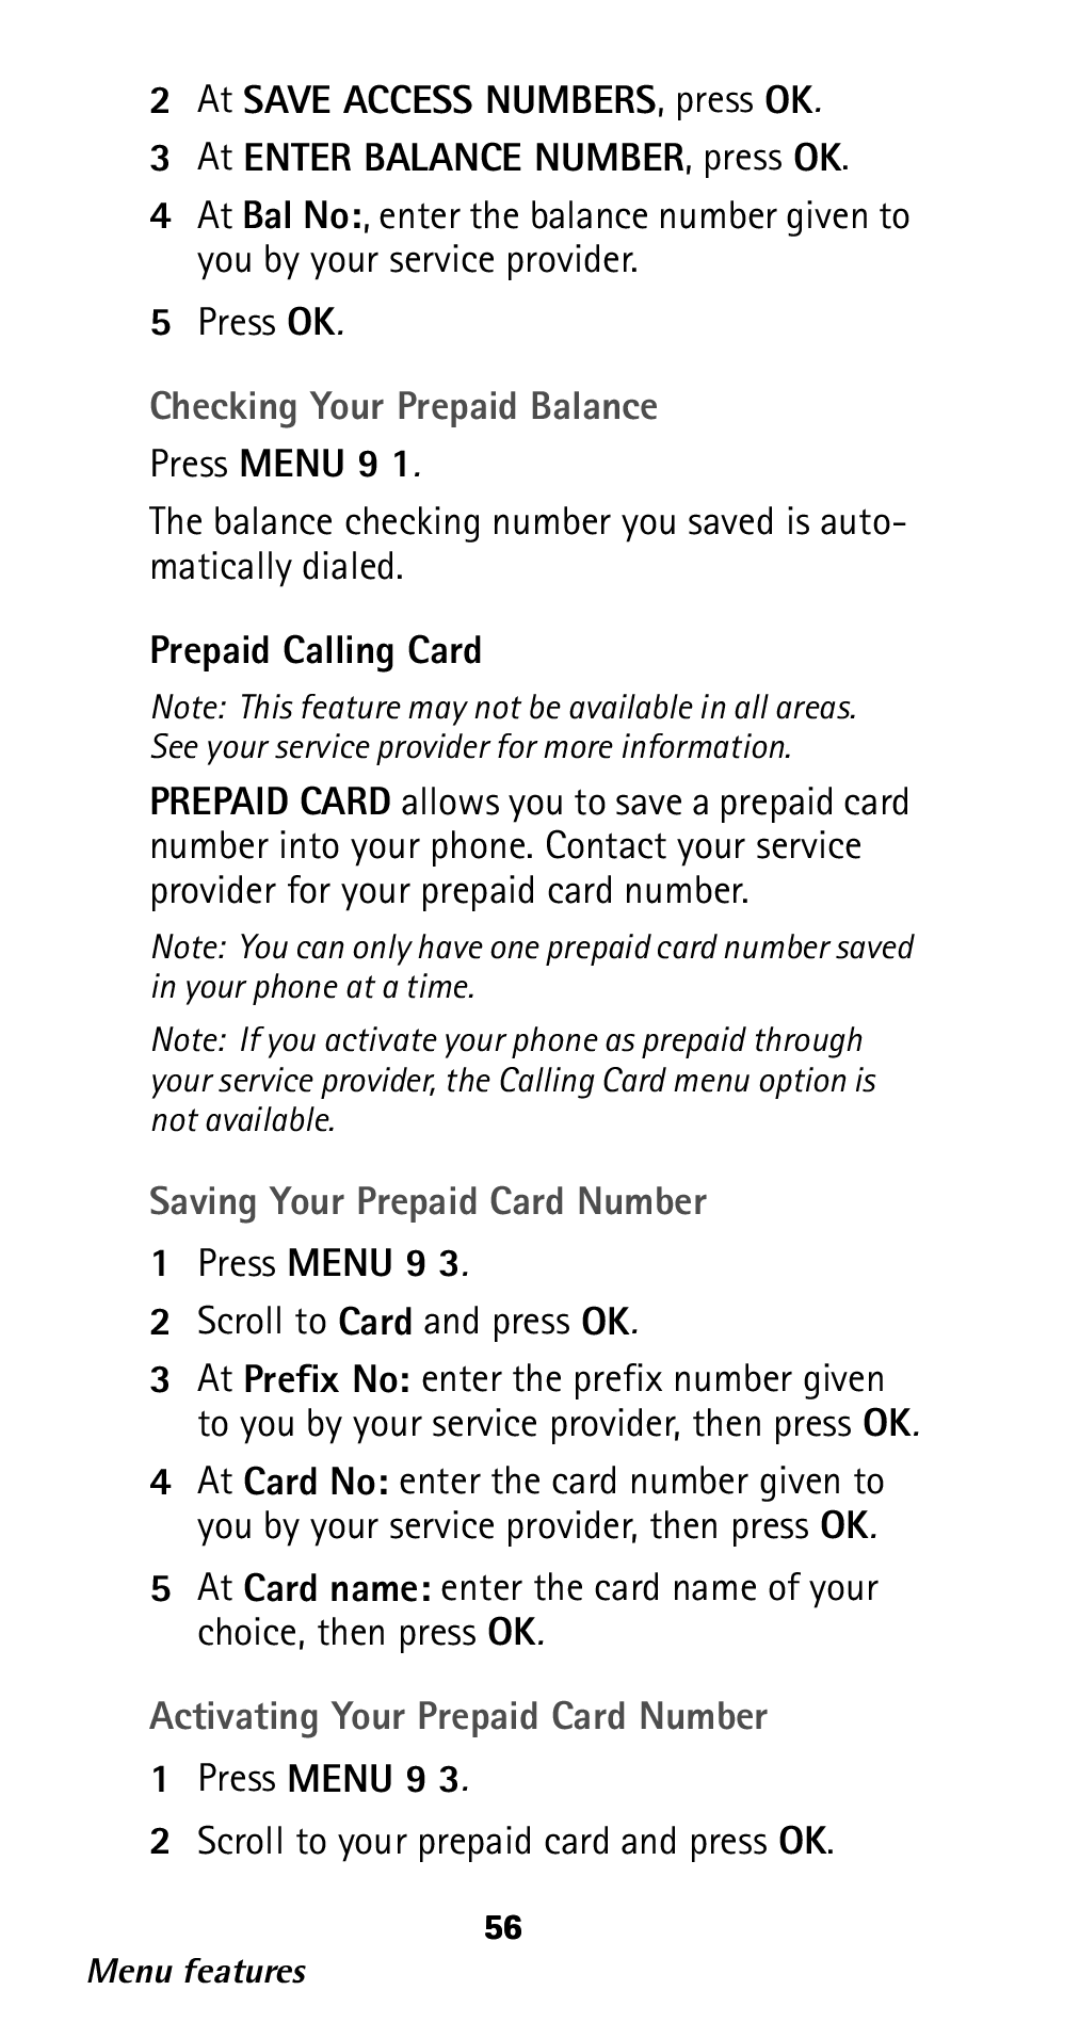 Nokia 282 owner manual Checking Your Prepaid Balance, Prepaid Calling Card, Saving Your Prepaid Card Number 